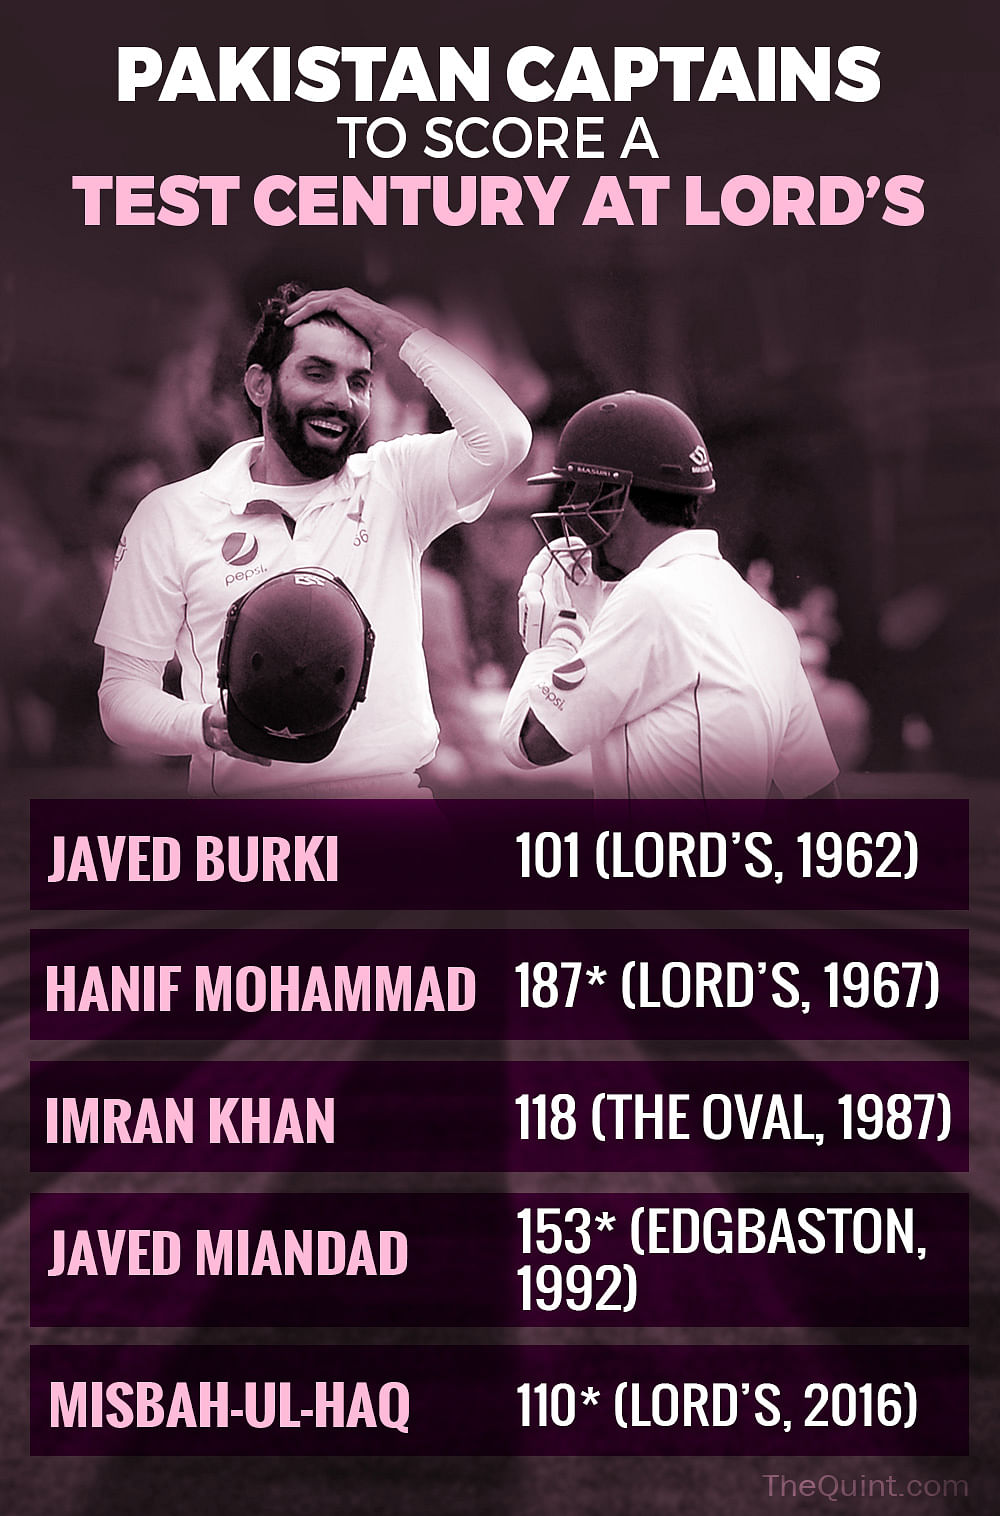 Infographics: Misbah-ul-Haq became the oldest Test captain to score a century on Thursday.